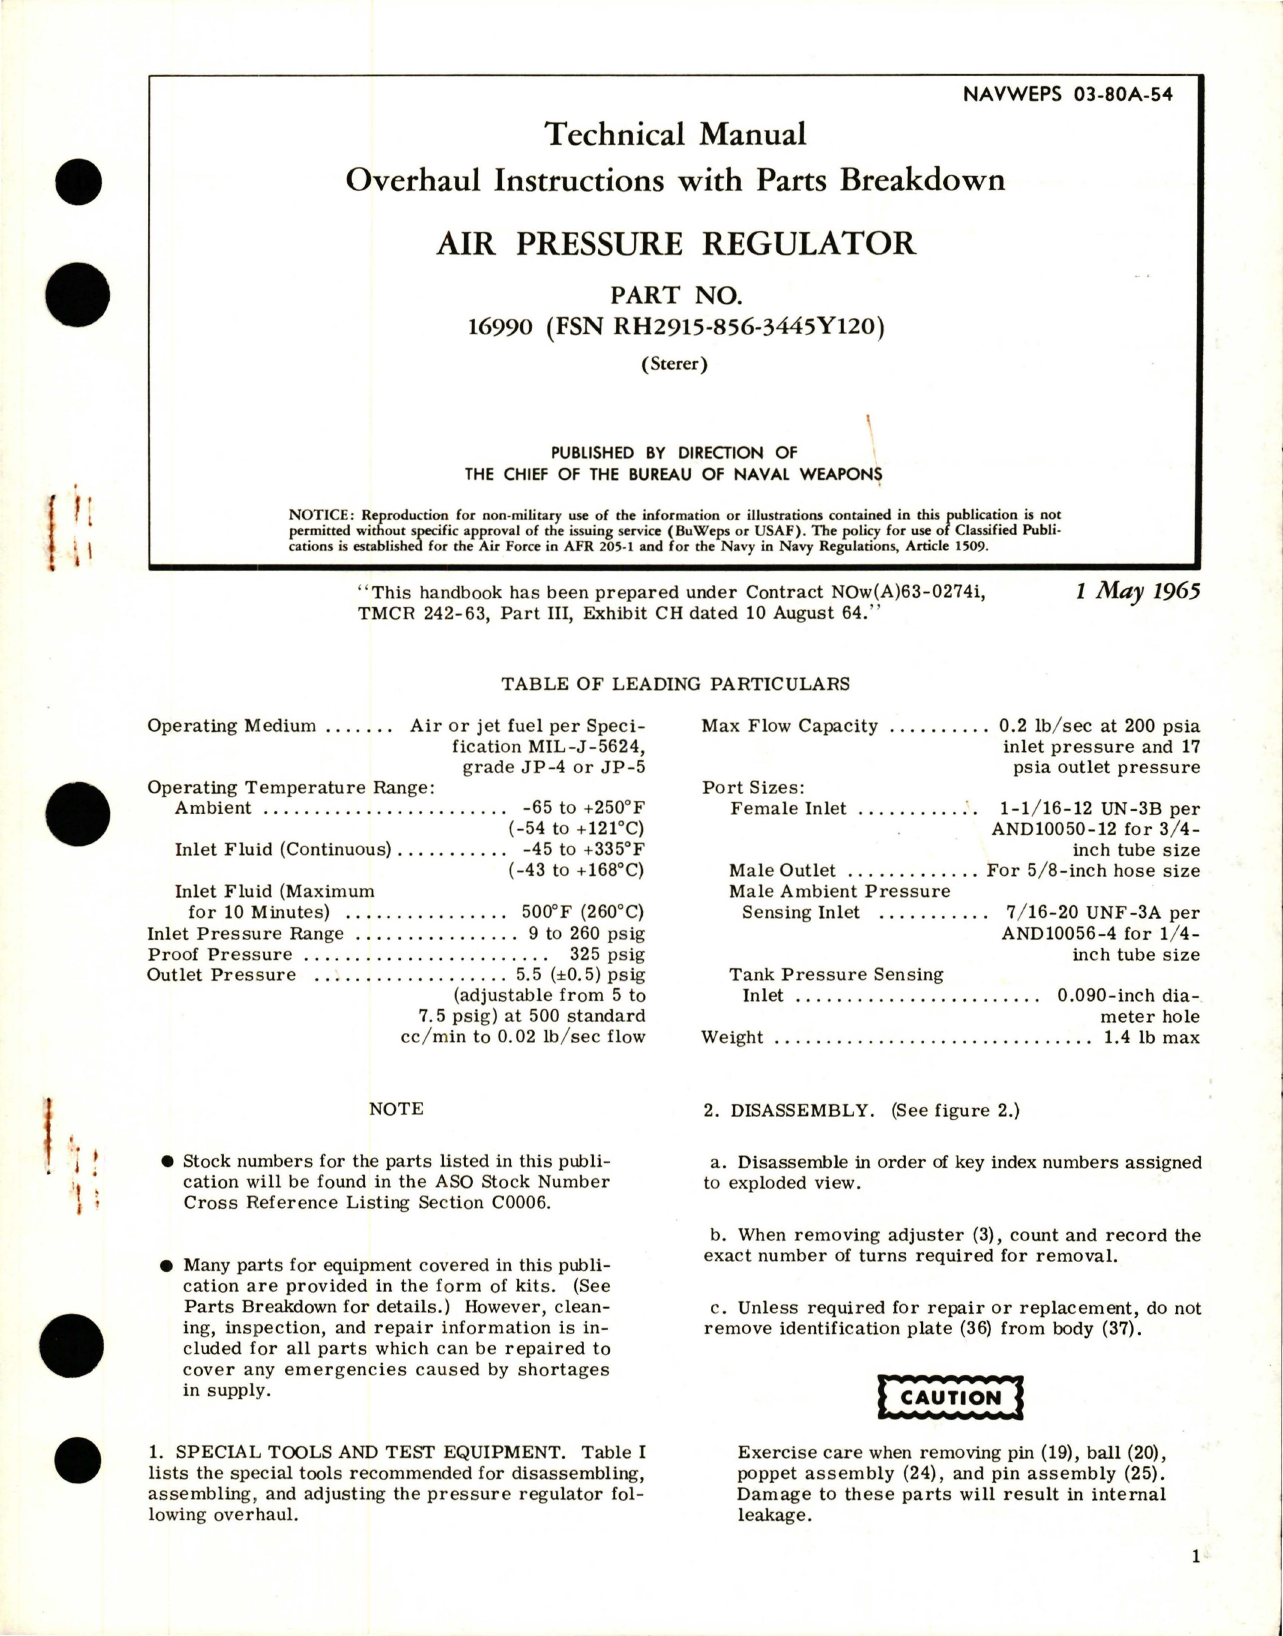 Sample page 1 from AirCorps Library document: Overhaul Instructions with Parts Breakdown for Air Pressure Regulator - Part 16990 